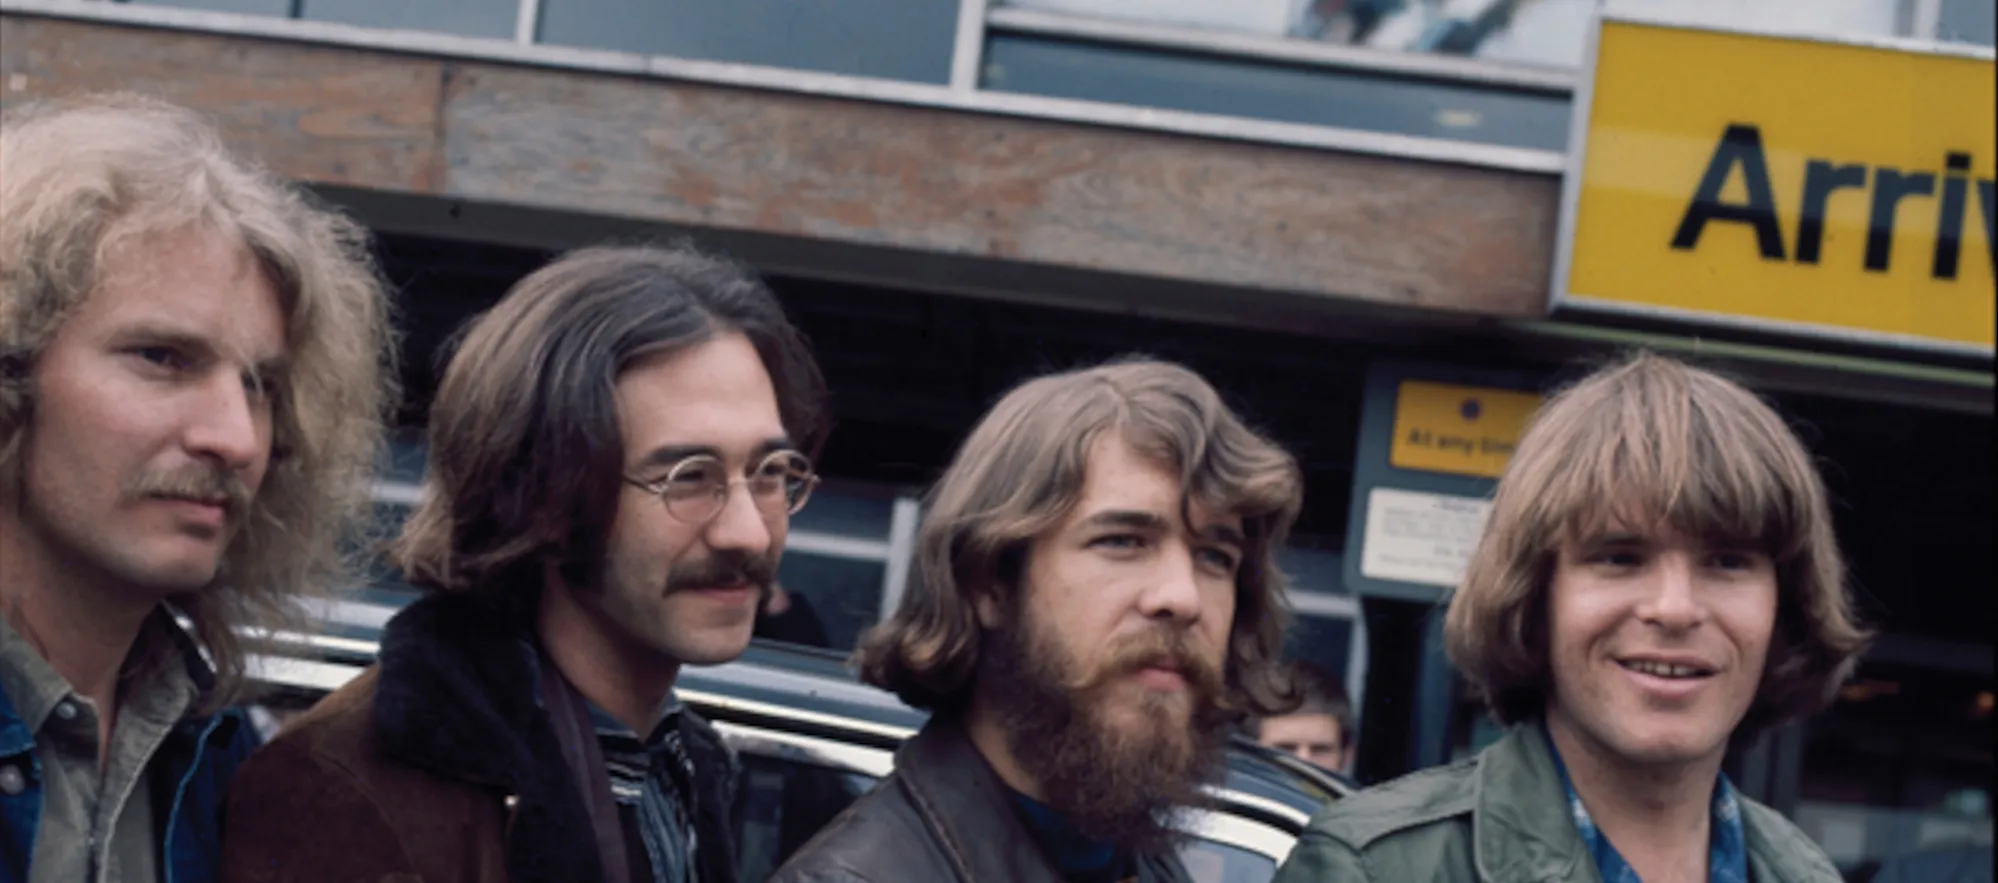 Never-Before-Released Creedence Clearwater Revival Live Album Set for Release, Jeff Bridges Narrates Doc